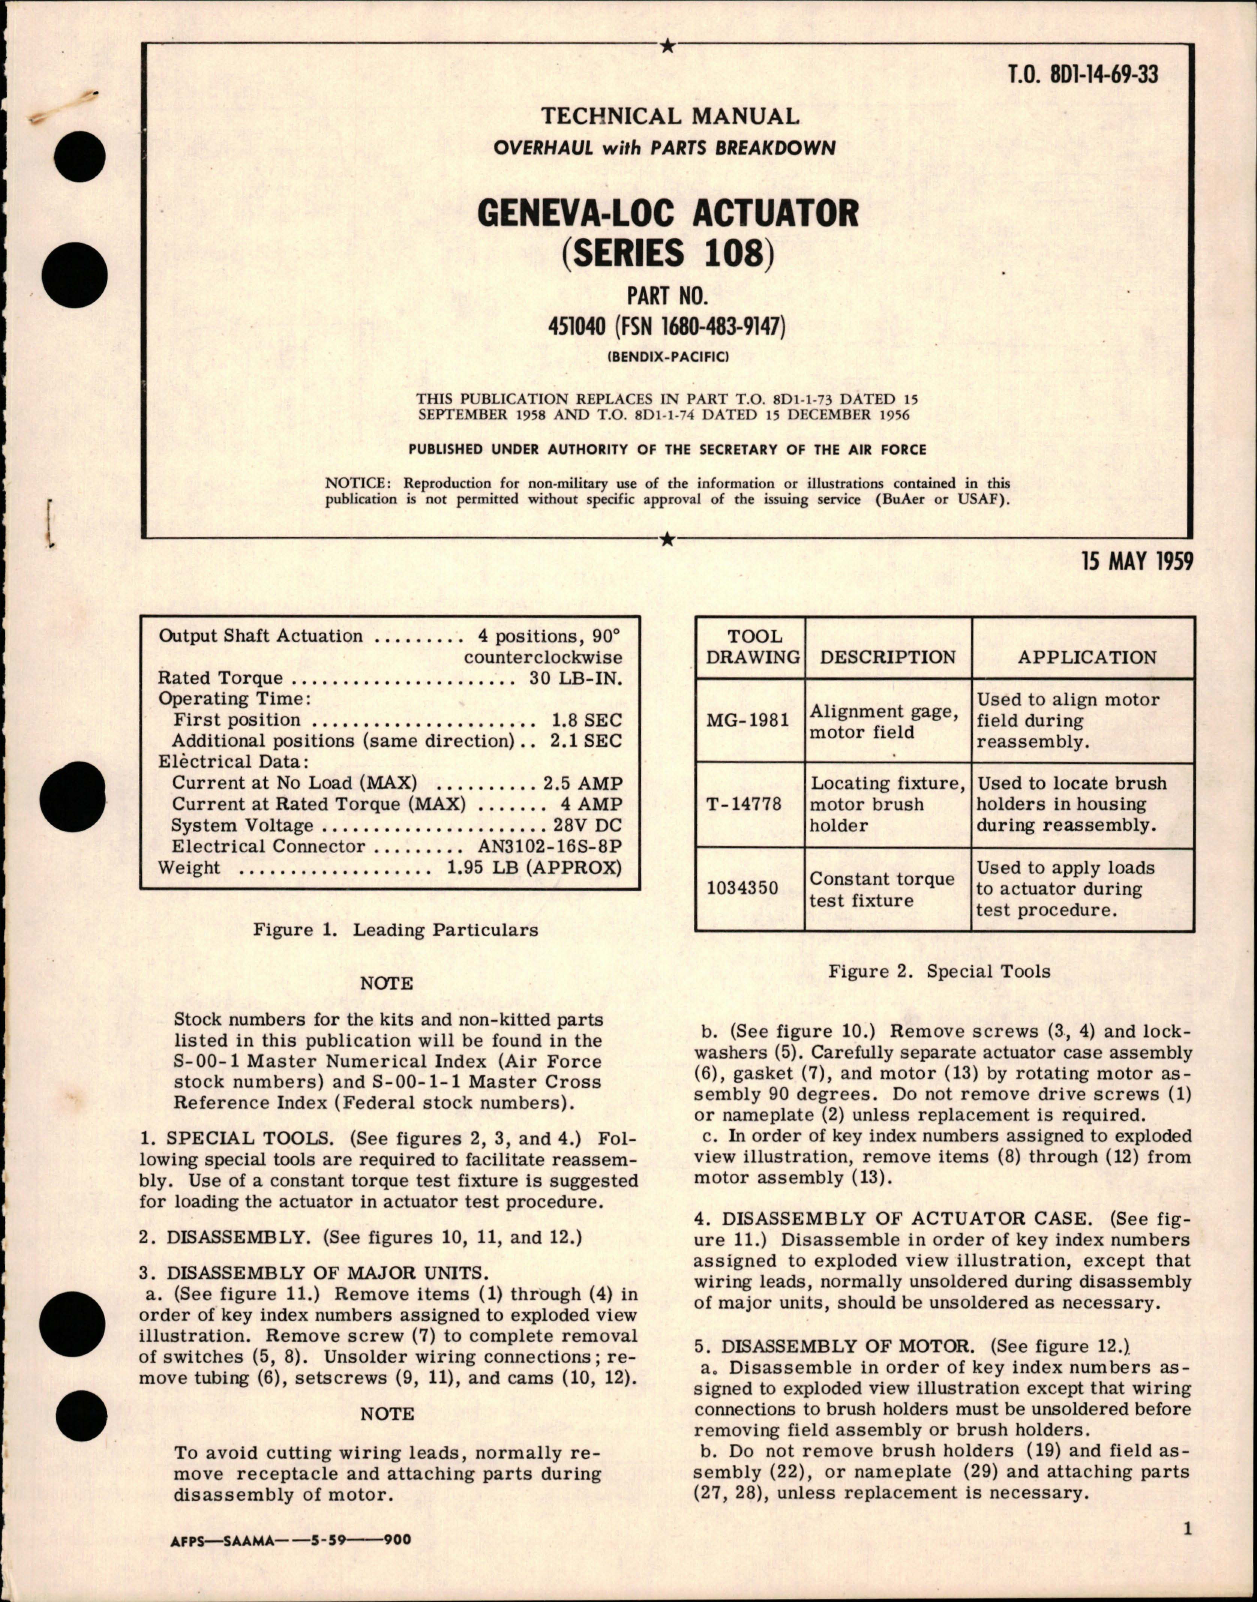 Sample page 1 from AirCorps Library document: Overhaul with Parts Breakdown for Geneva-Loc Actuator - Series 108 - Part 451040